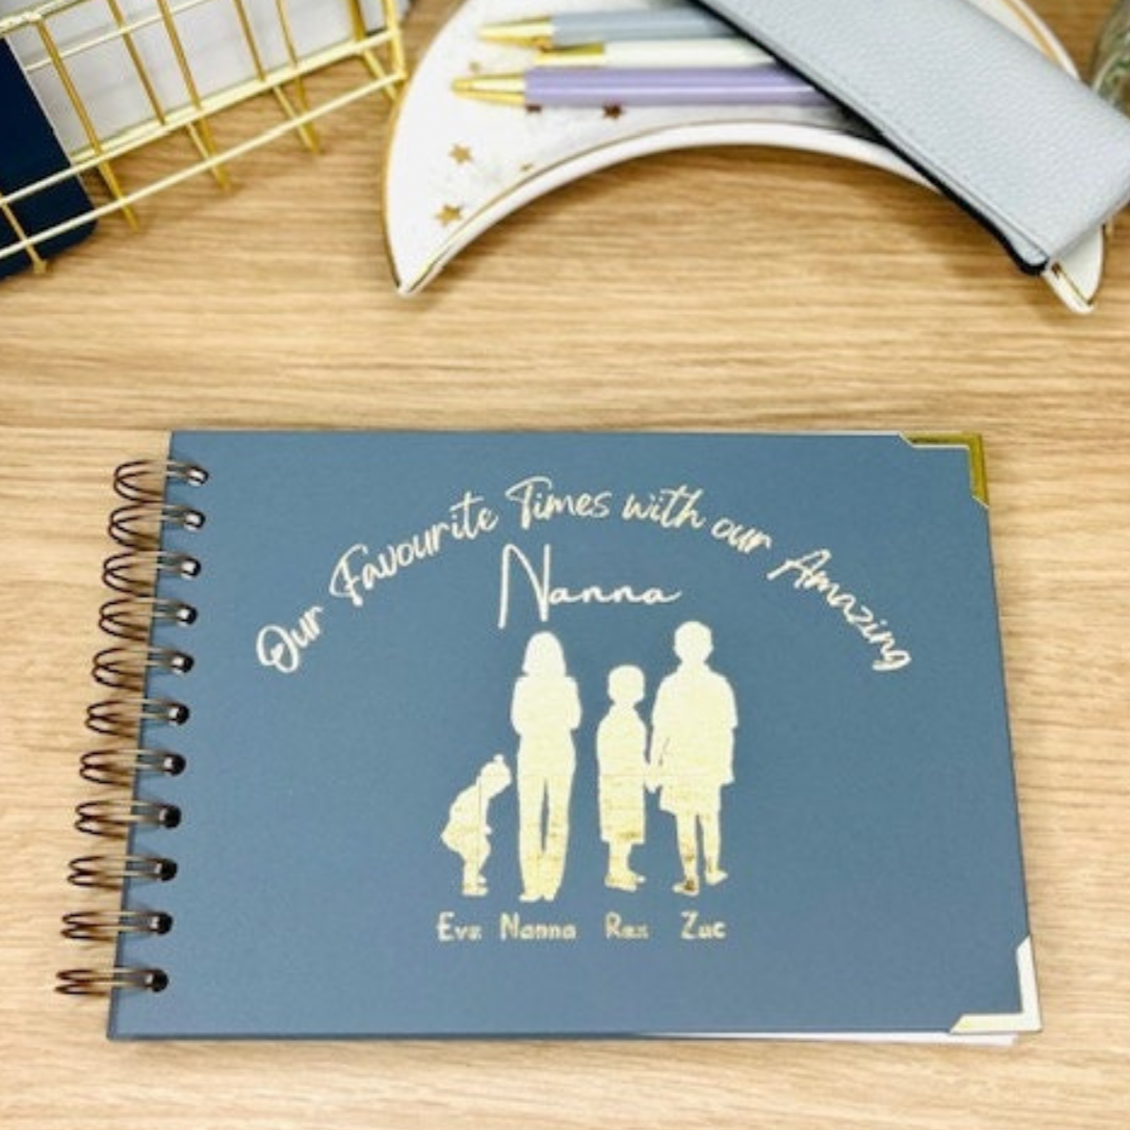 An A5 memory book cover with the words 'Our Favourite Times with our Amazing Nanna' with the silhouettes of a ladie with three different size children with their names underneath. All in gold foil